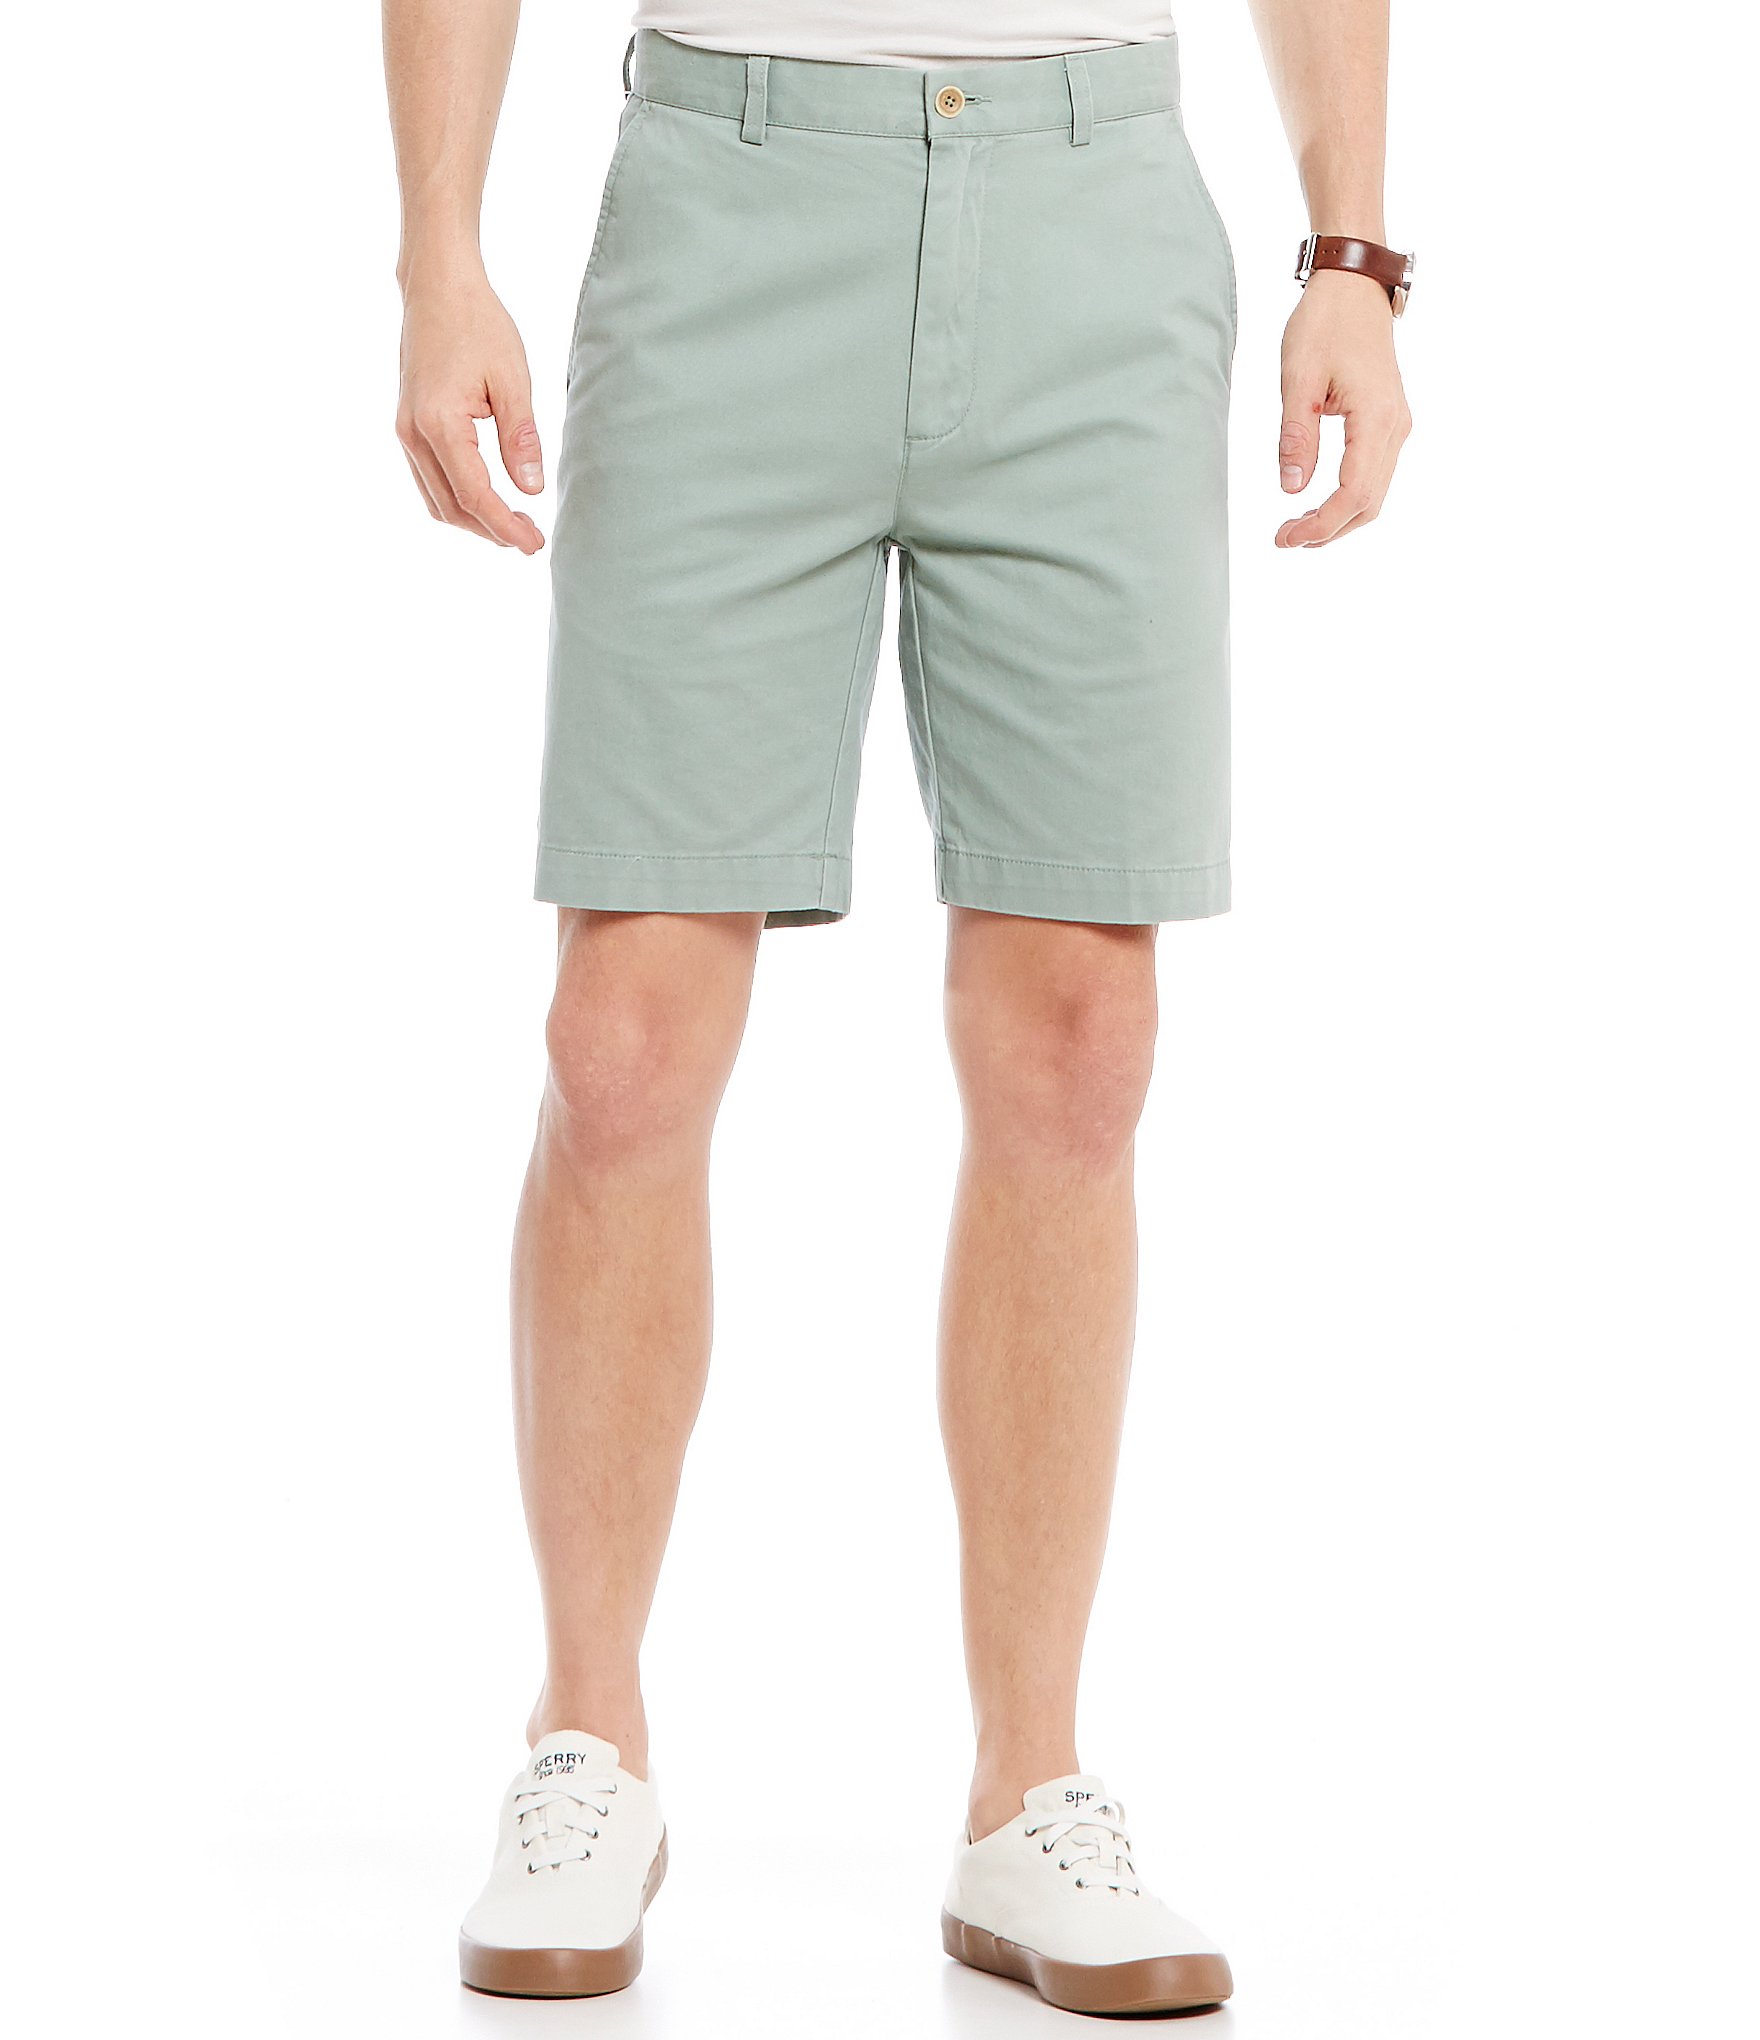 Roundtree & Yorke Big and Tall Flat Front Washed Cotton Shorts | Dillards